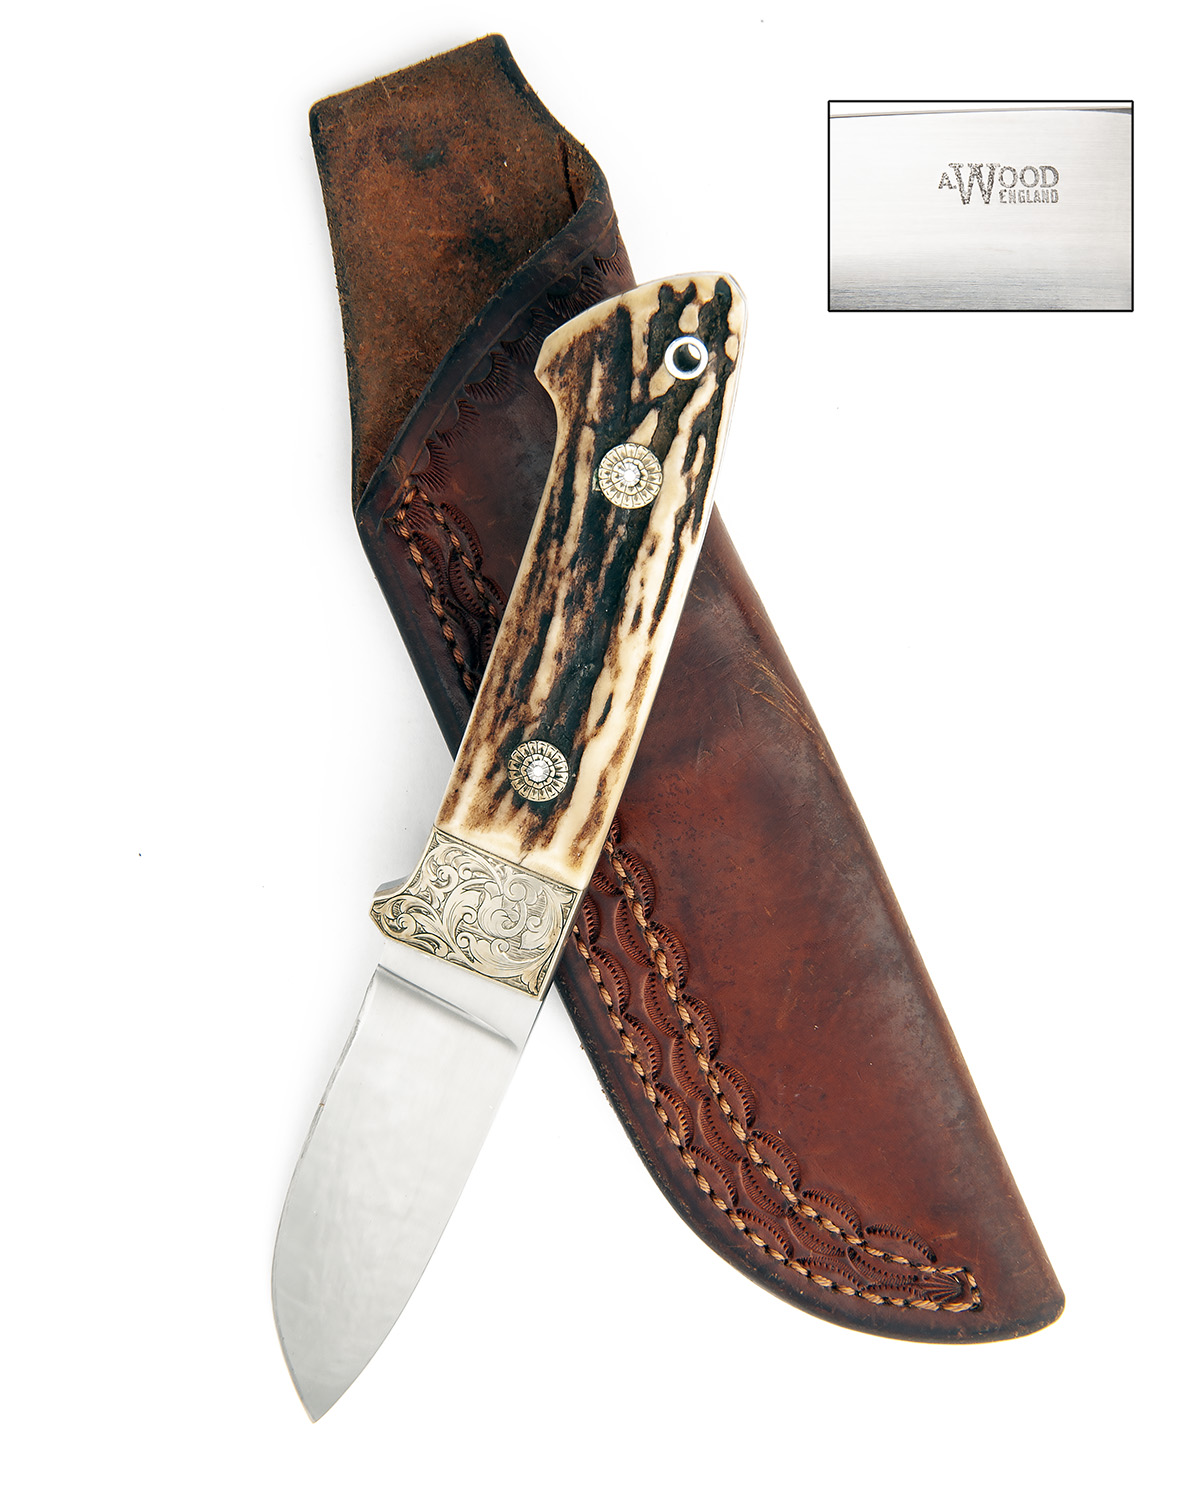 ALAN WOOD, ENGLAND A STAG-HILTED SPORTING-KNIFE, with polished drop-point 3 1/2in. fixed blade